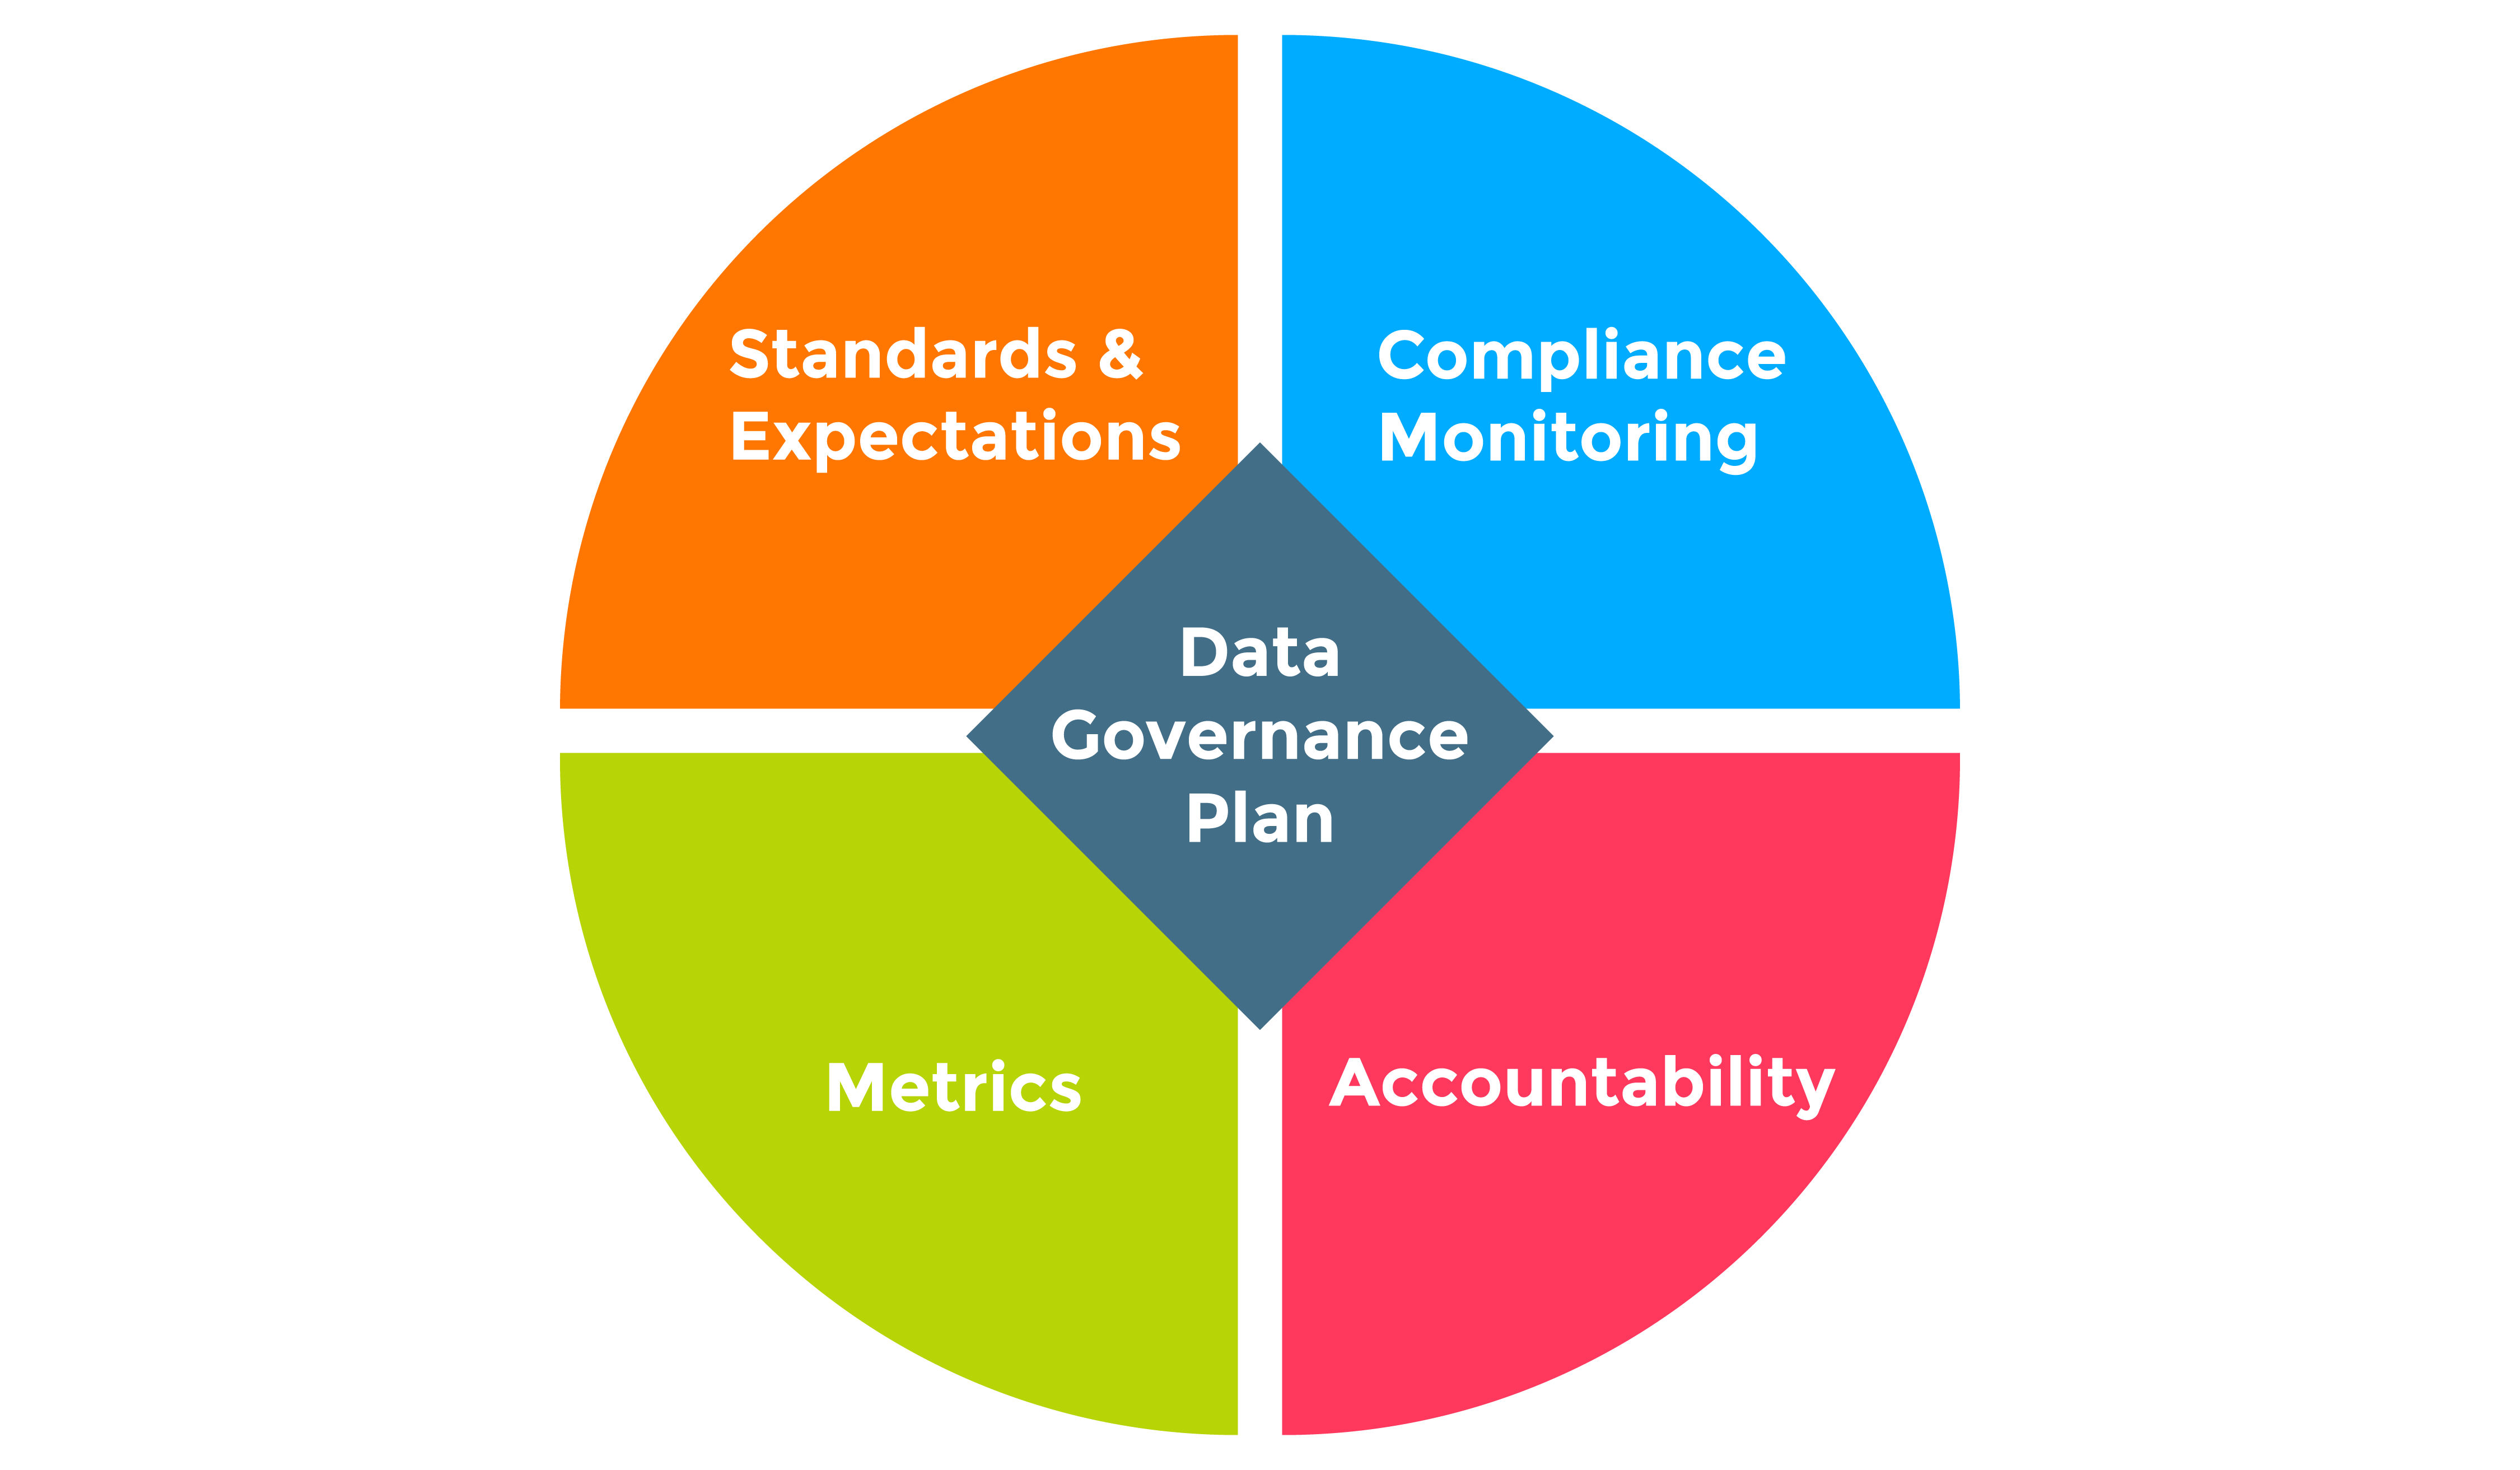 A data governance plan includes standards, metrics, accountability, and compliance monitoring